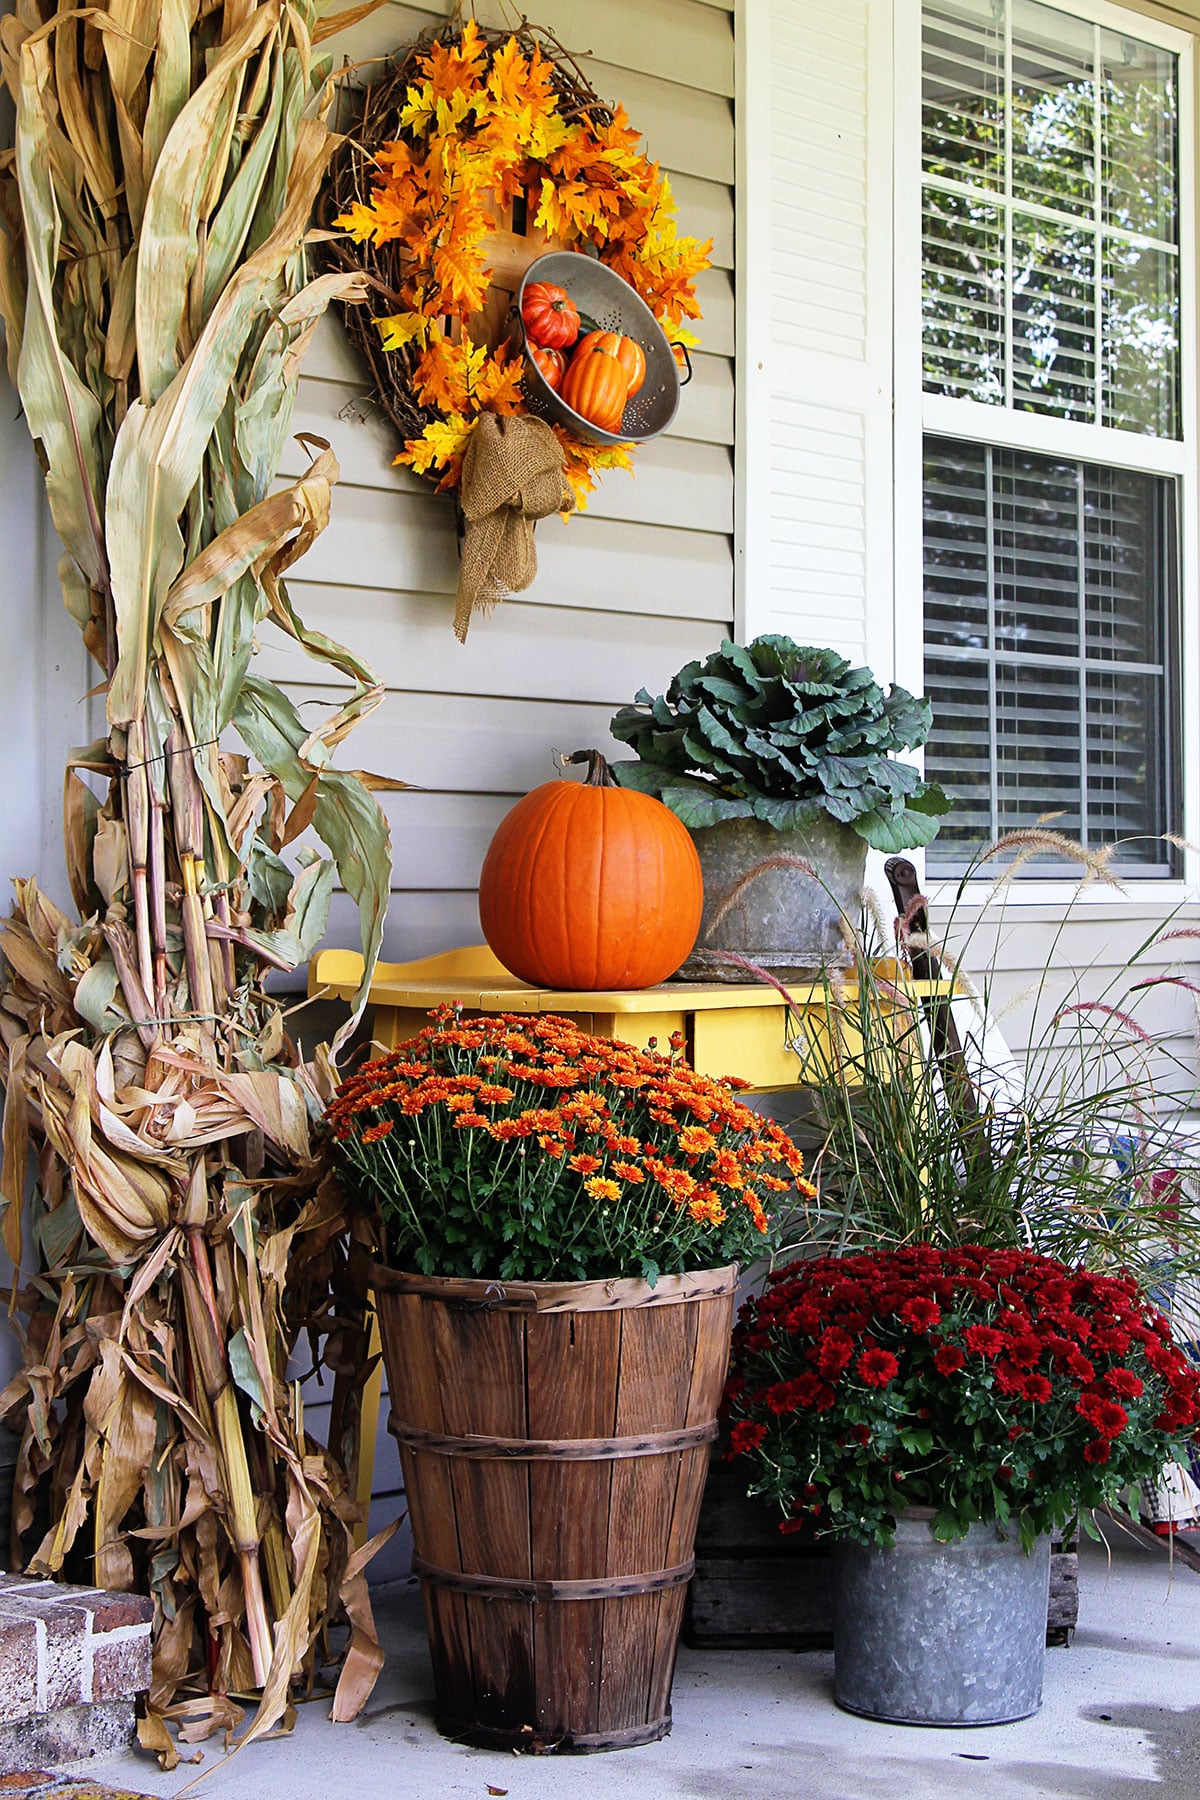 Fall porch decorations including orange  and red mums, ornamental cabbage, corn stalks and an orange pumpkin.